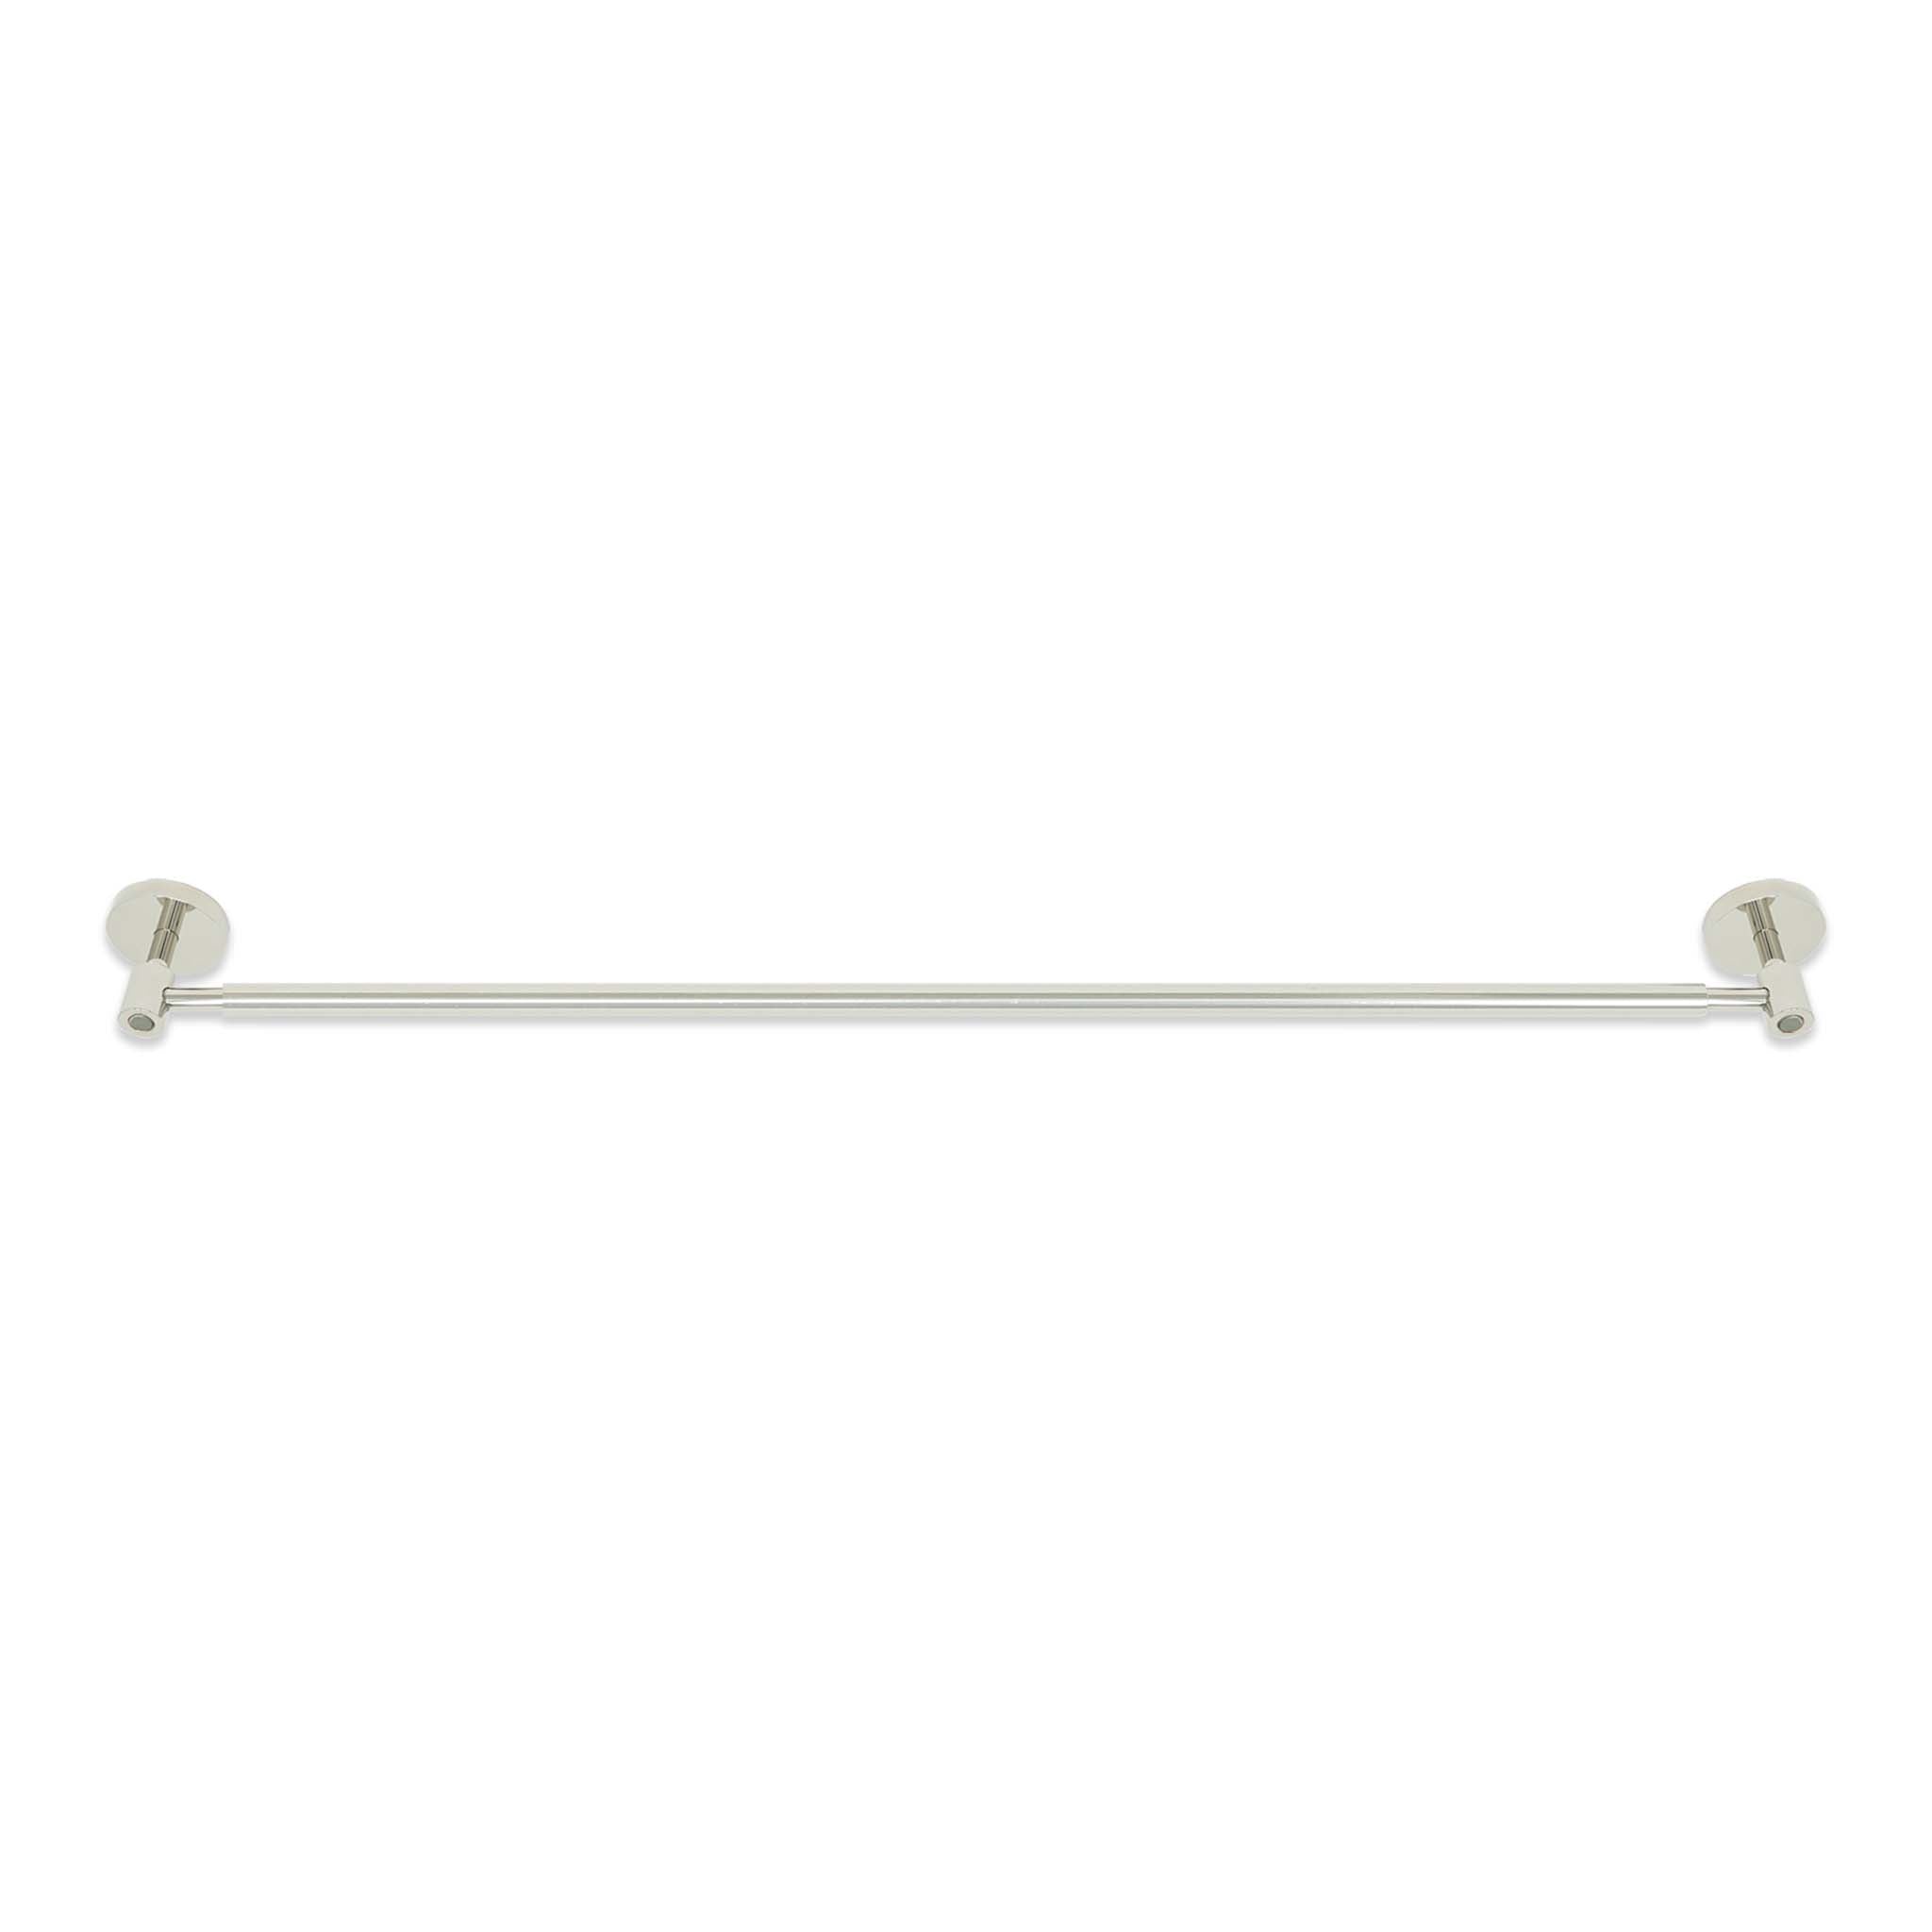 Nickel and spa color Head towel bar 24" Dutton Brown hardware